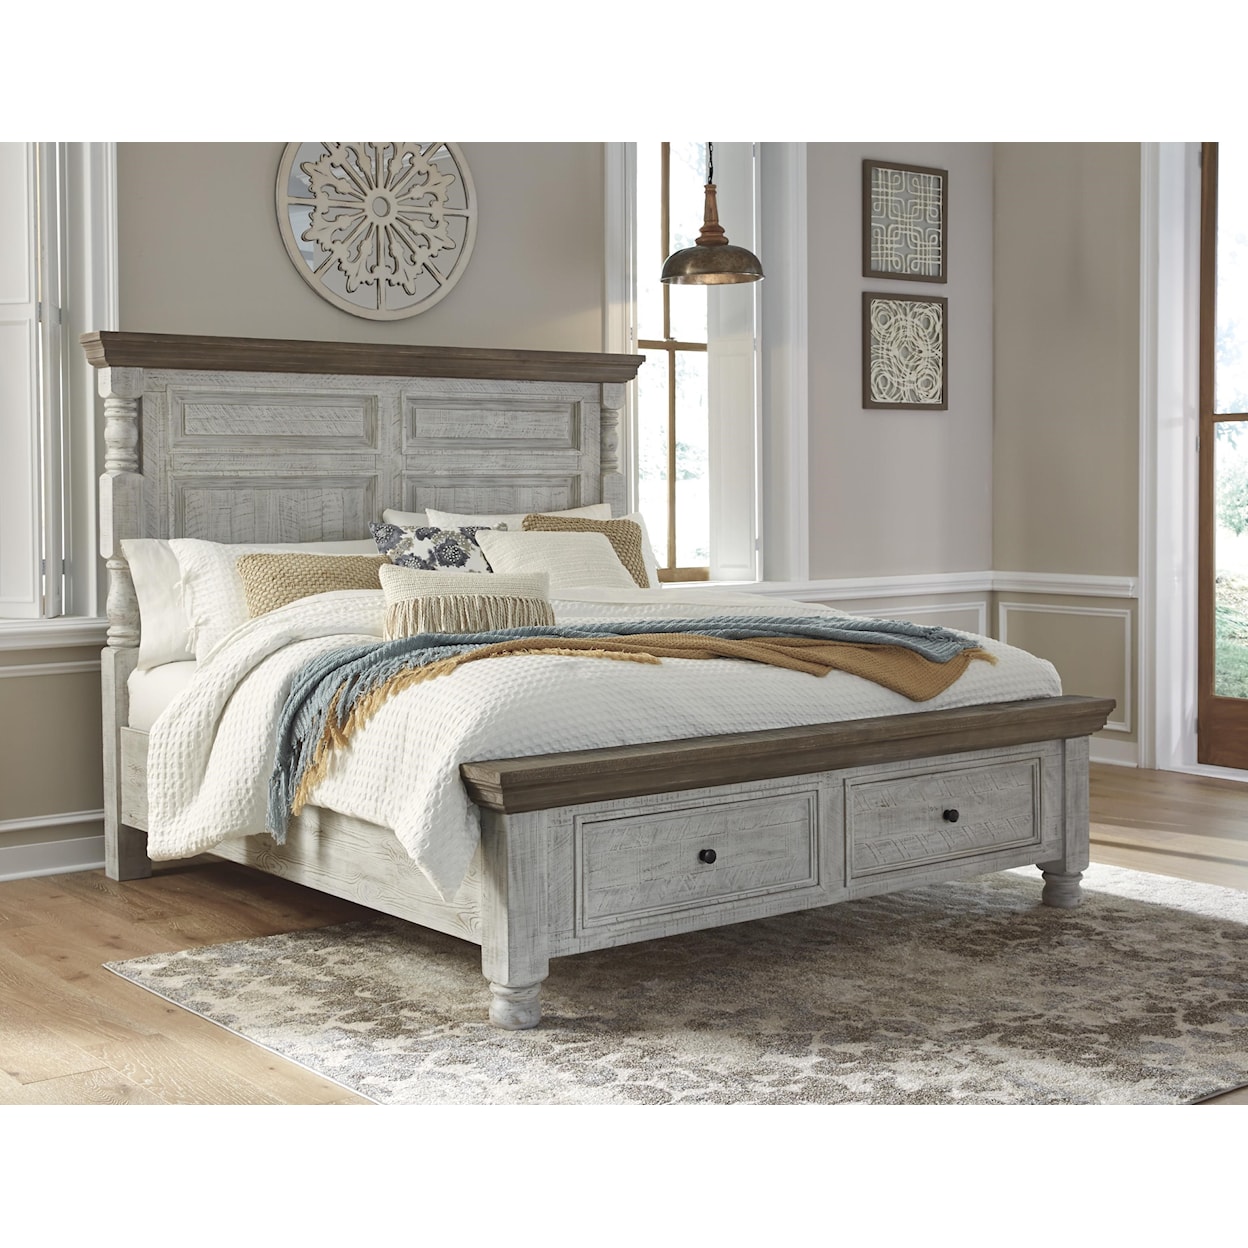 Signature Design by Ashley Havalance Queen Bed with Storage